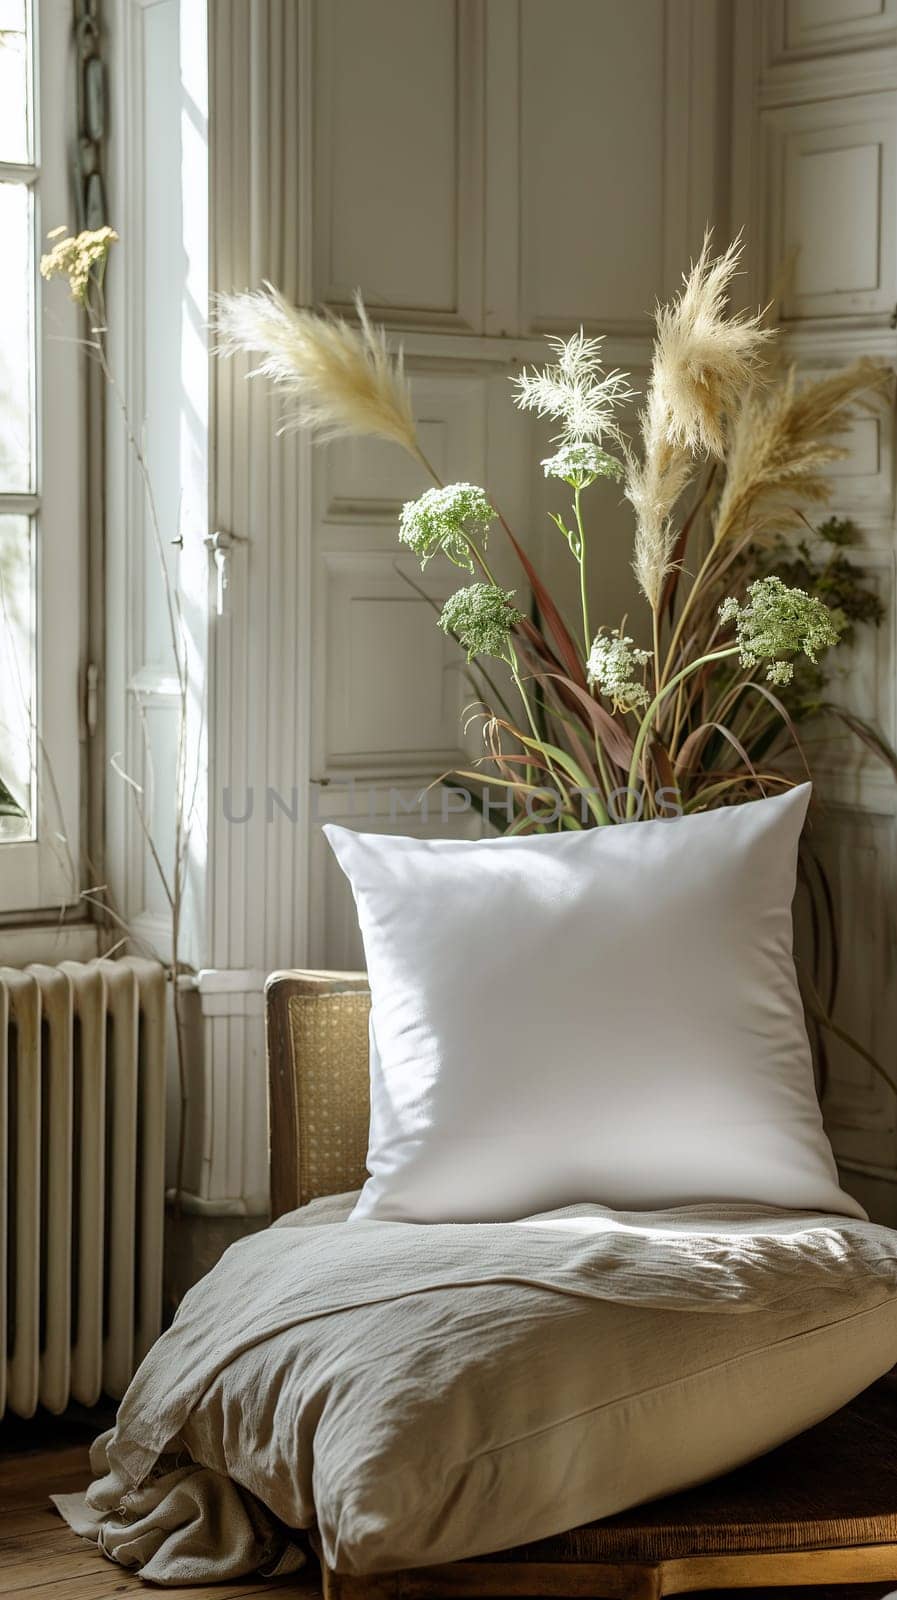 Peaceful home interior featuring a soft cushion and elegant dried flowers by a sunlit window, ideal for branding mockups